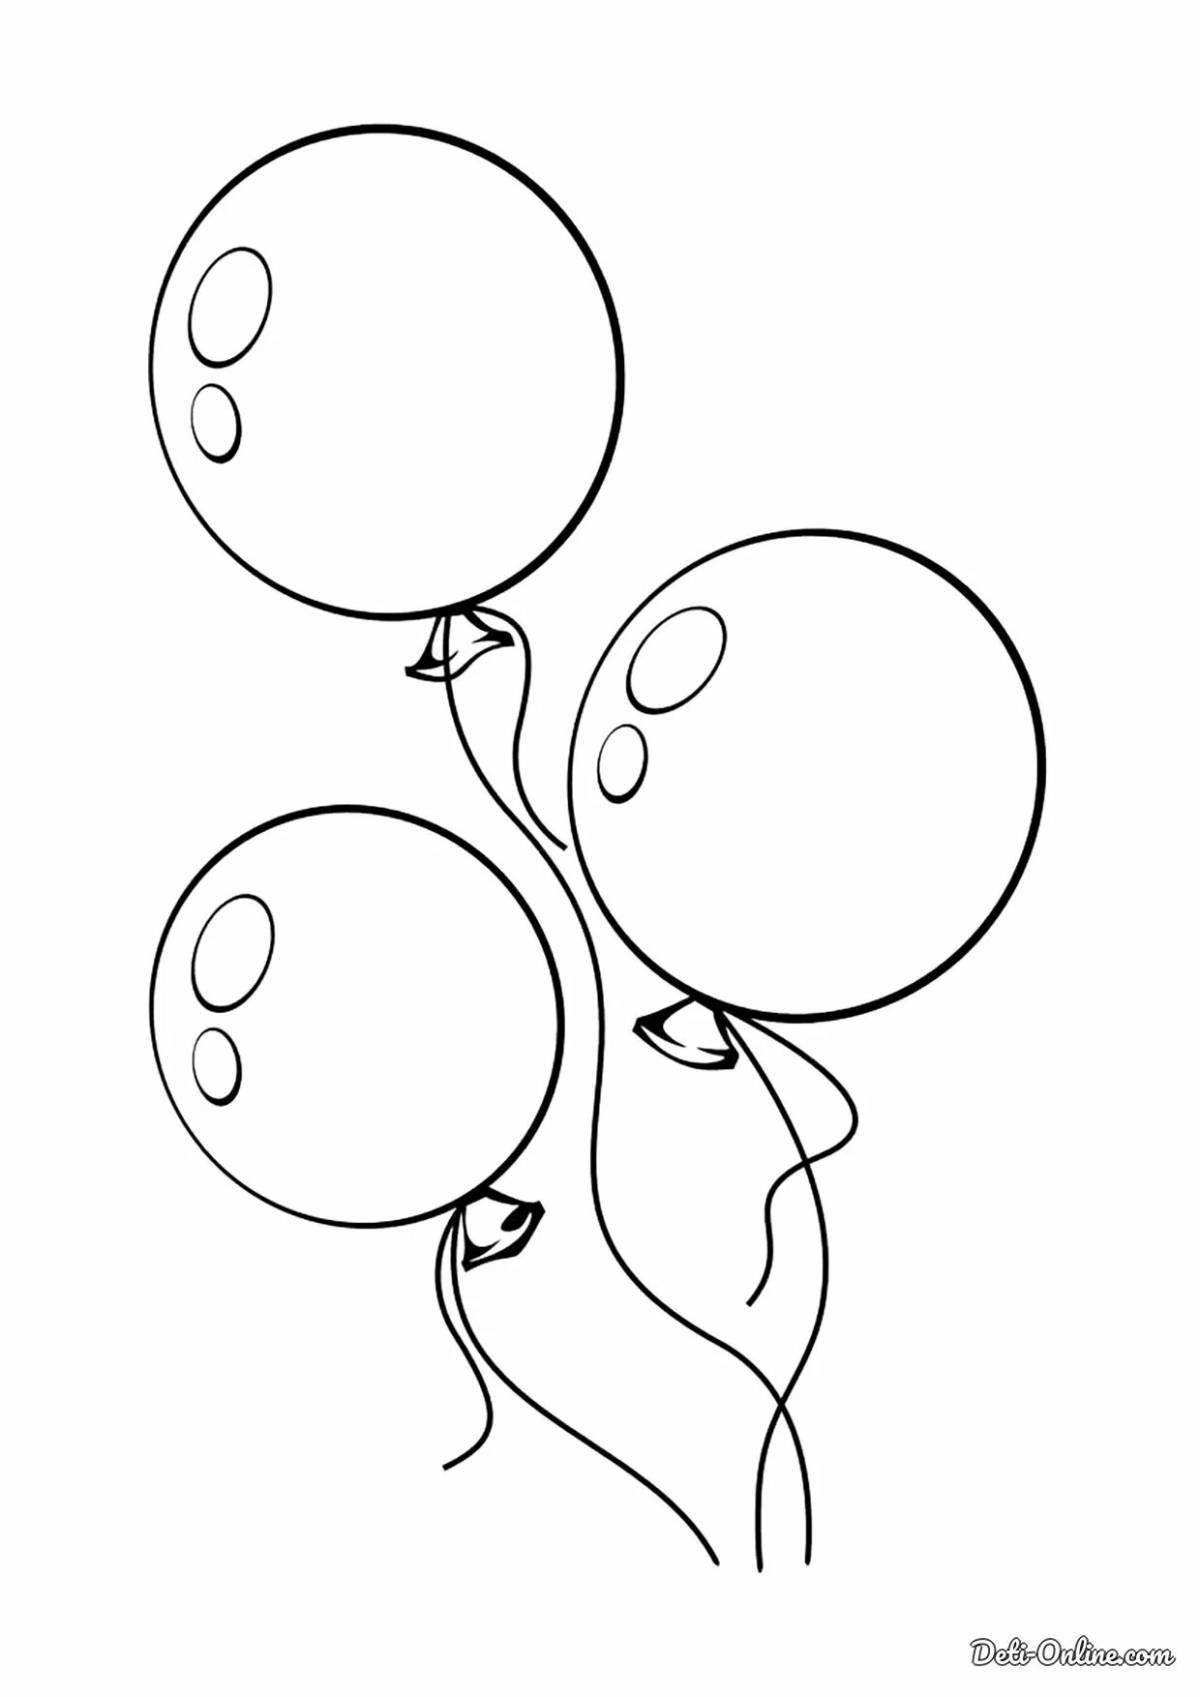 Coloring book dazzling balloons for children 2-3 years old